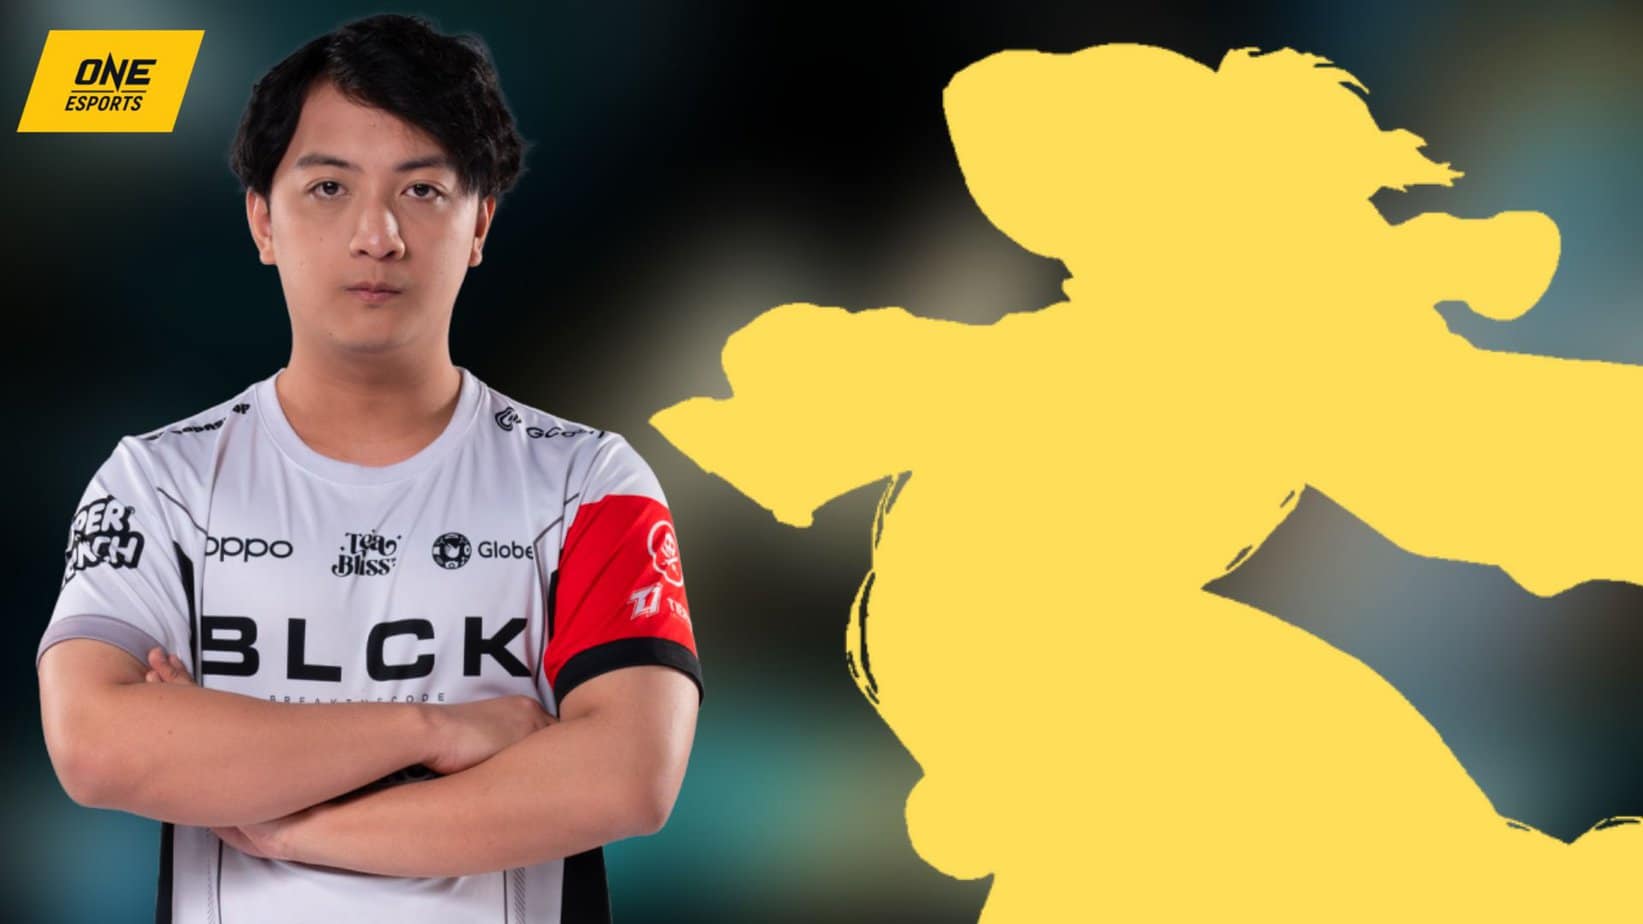 Exclusive: This is the most underrated marksman at M4, according to Blacklist’s OHEB - ONE Esports